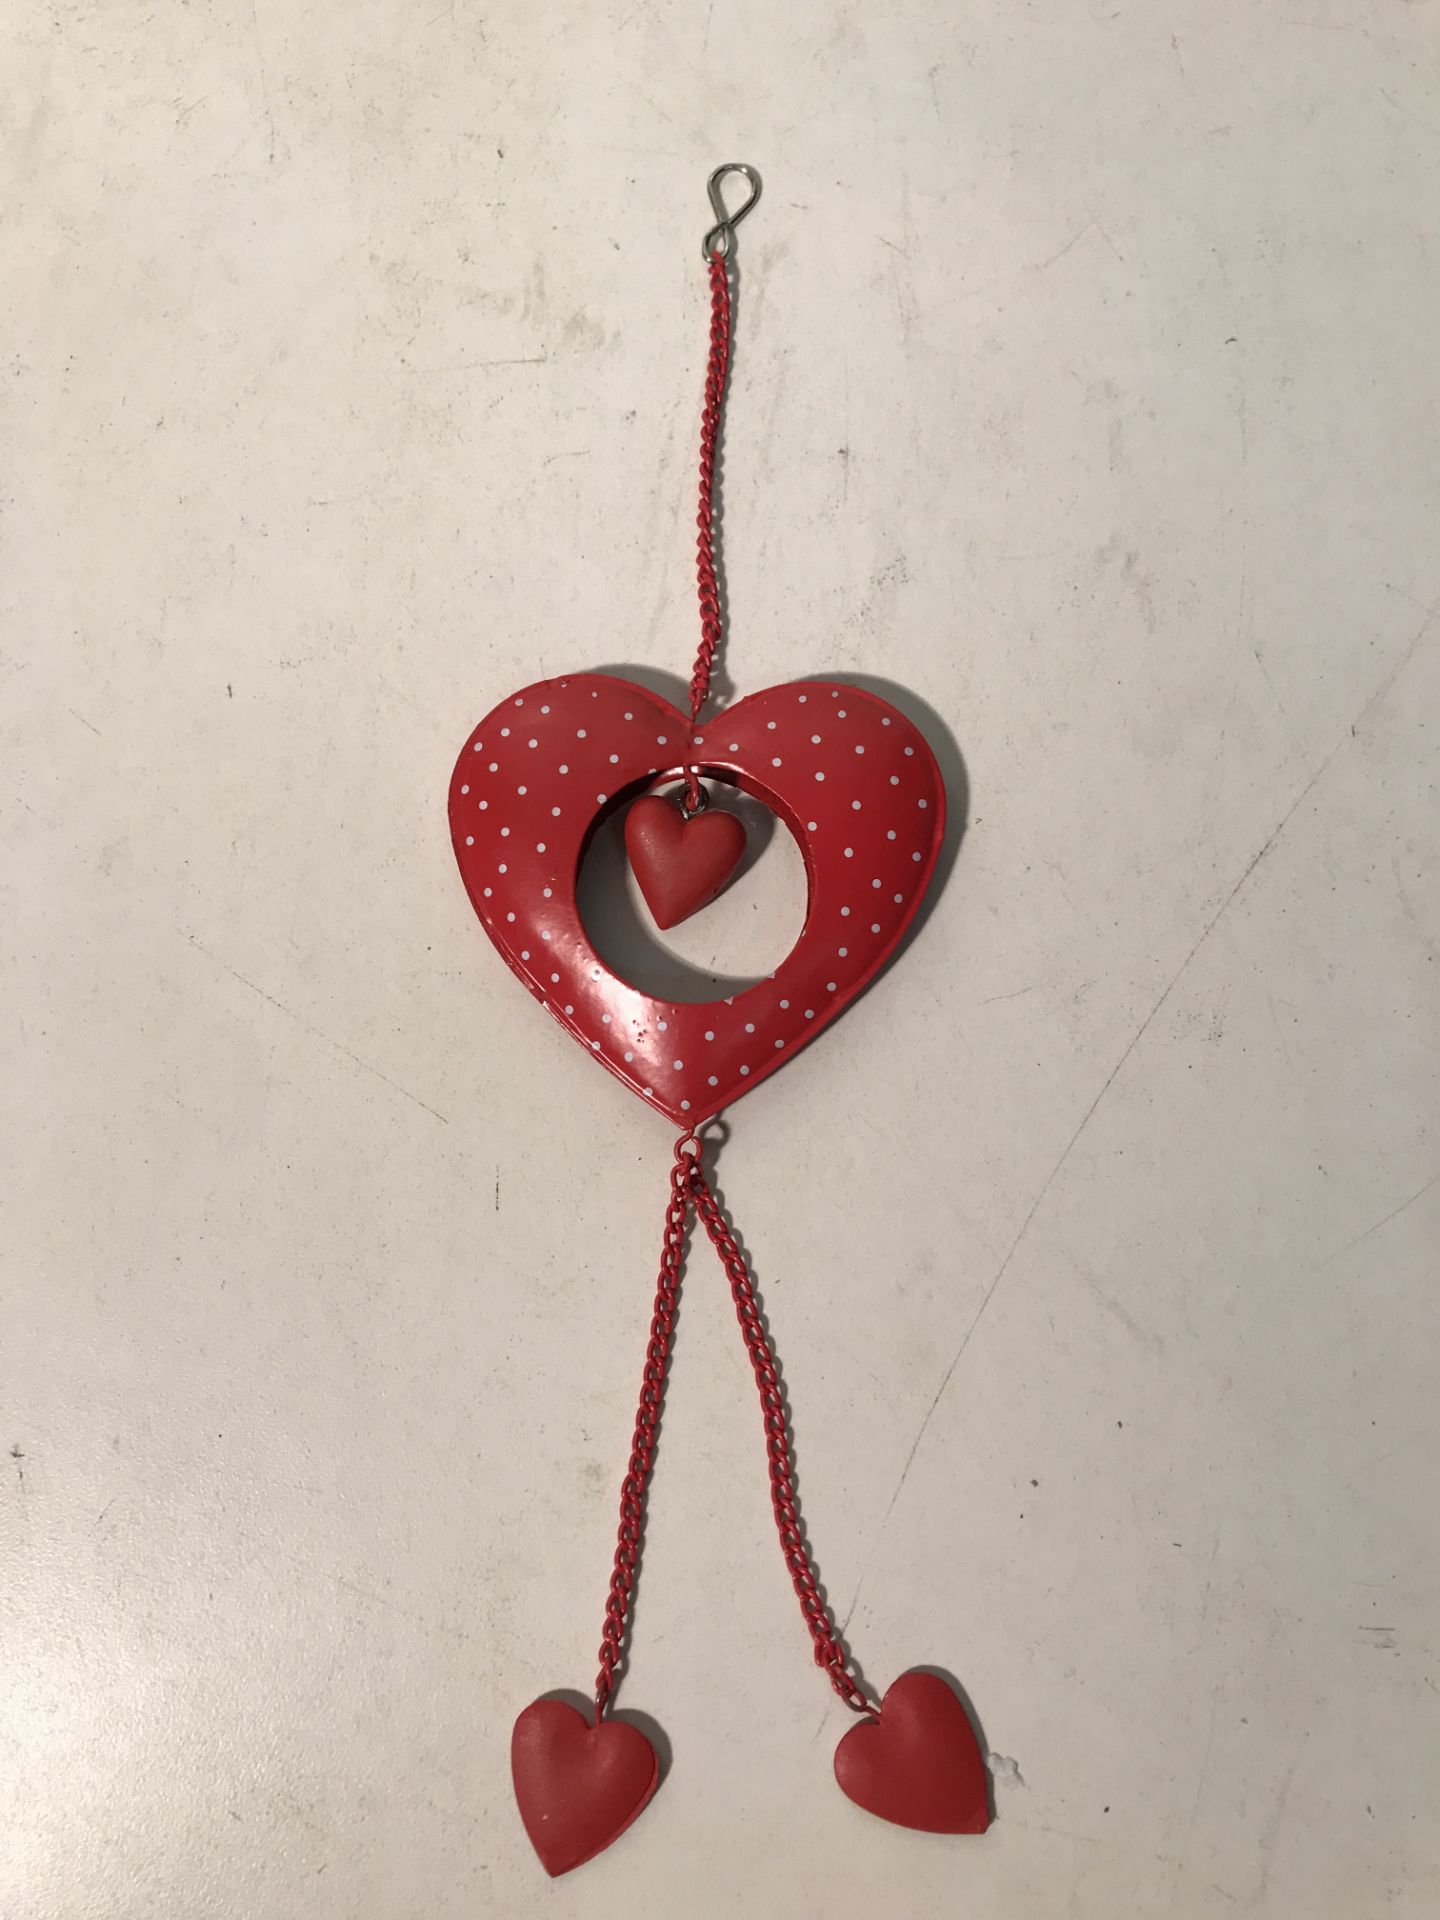 40 x Hanging Heart Charm Decorations - Image 2 of 3